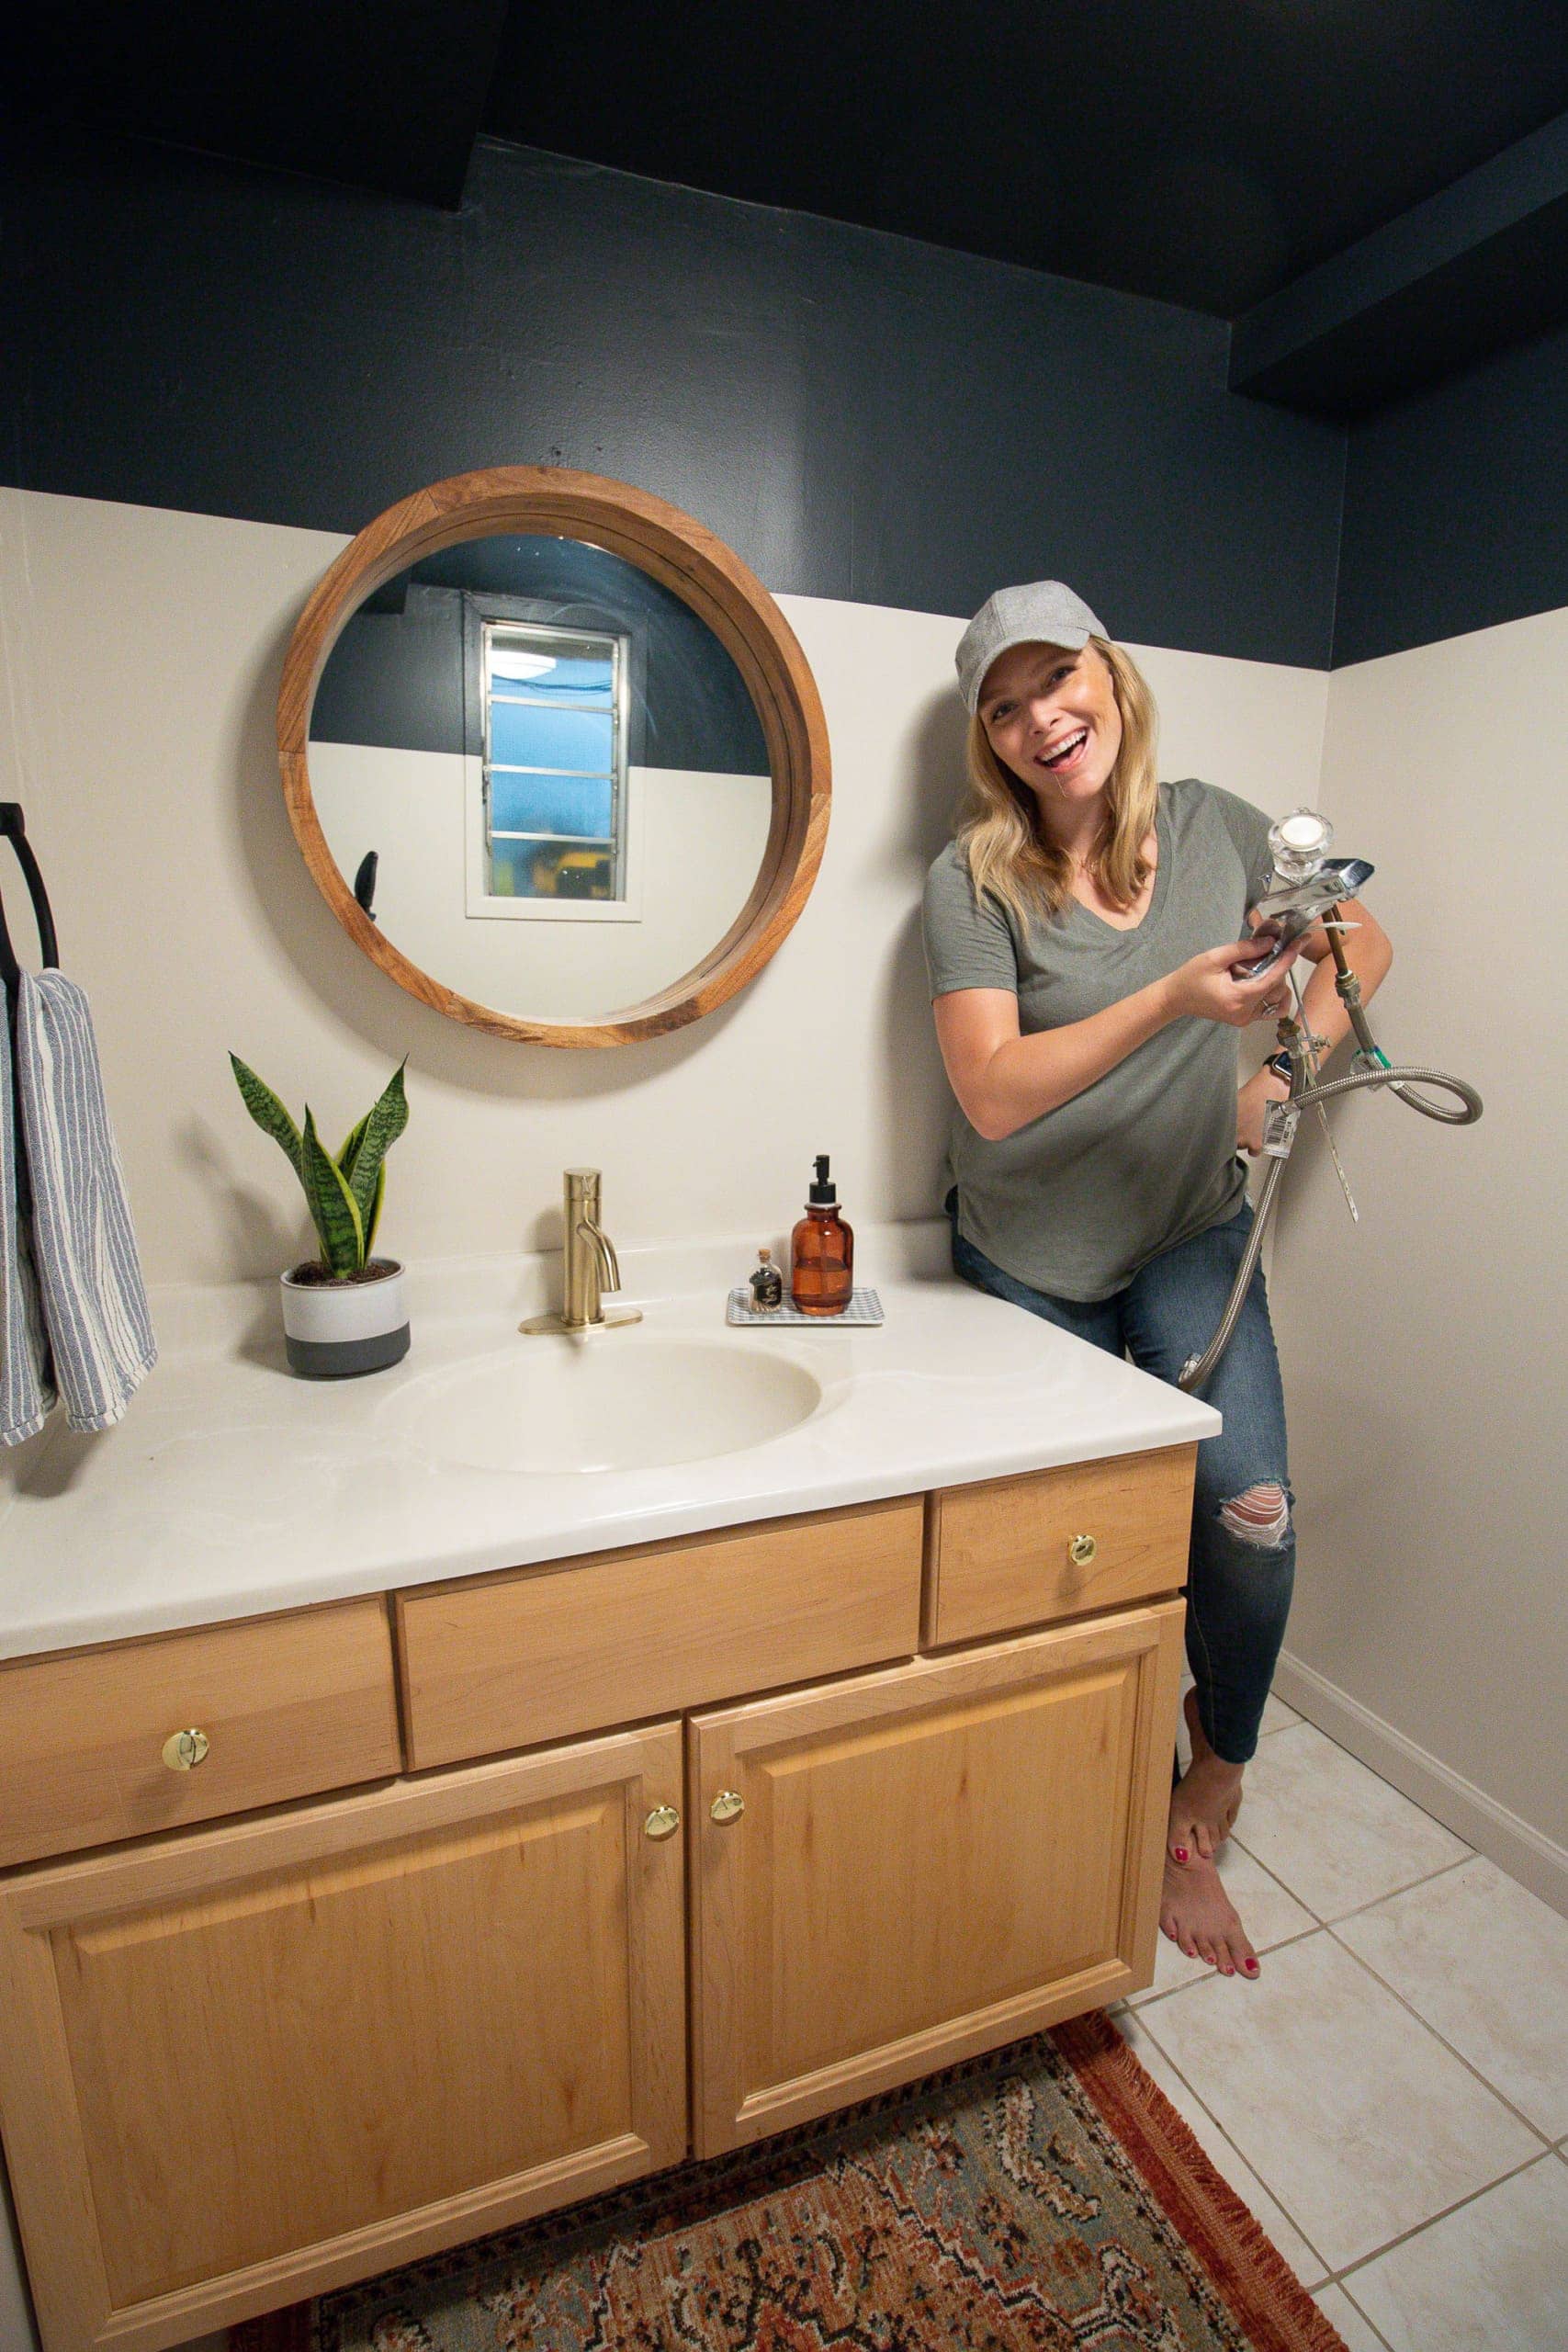 Tips to install a bathroom faucet